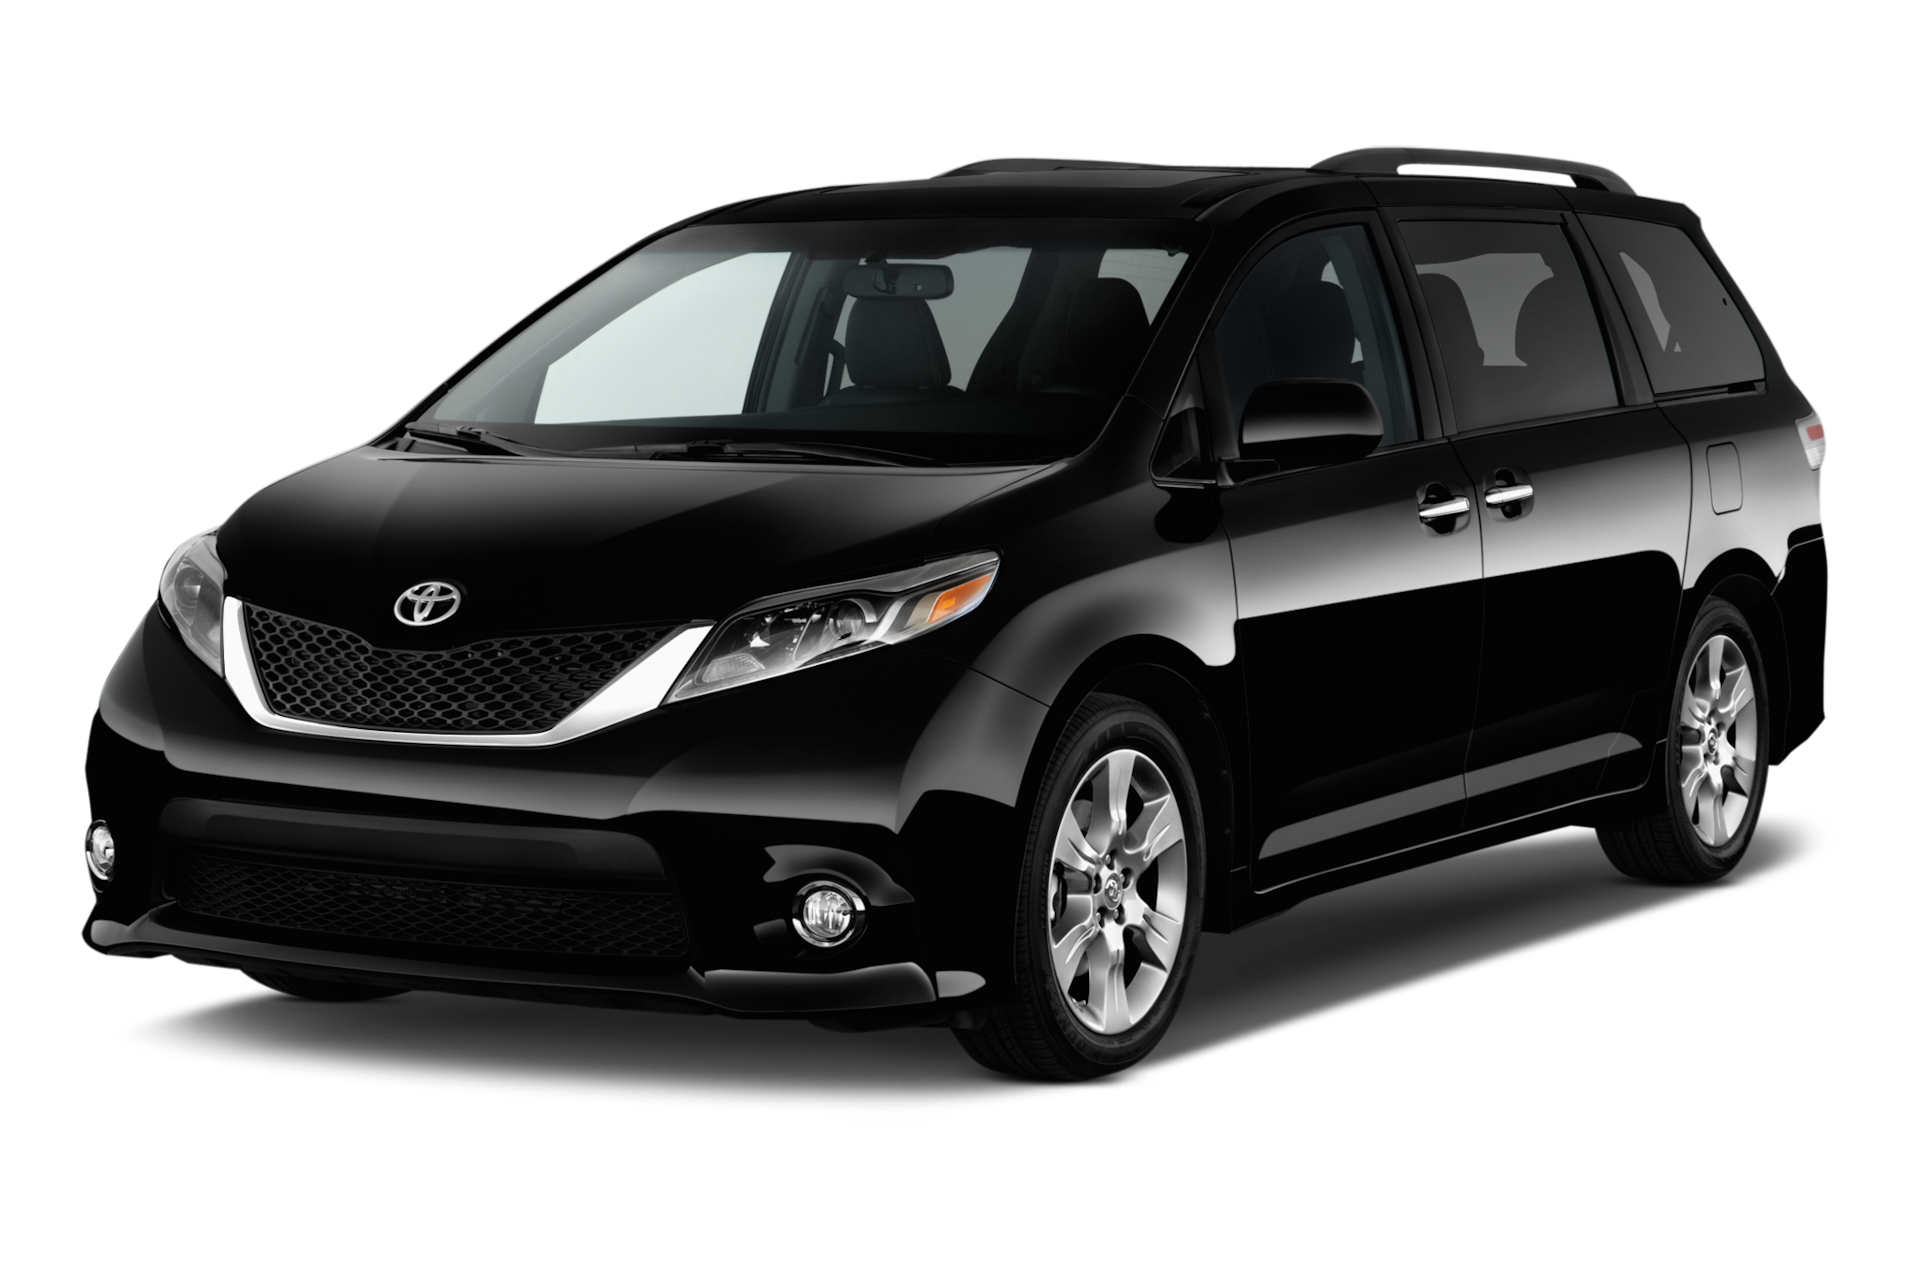 2016 Toyota Sienna Prices, Reviews, and Photos - MotorTrend